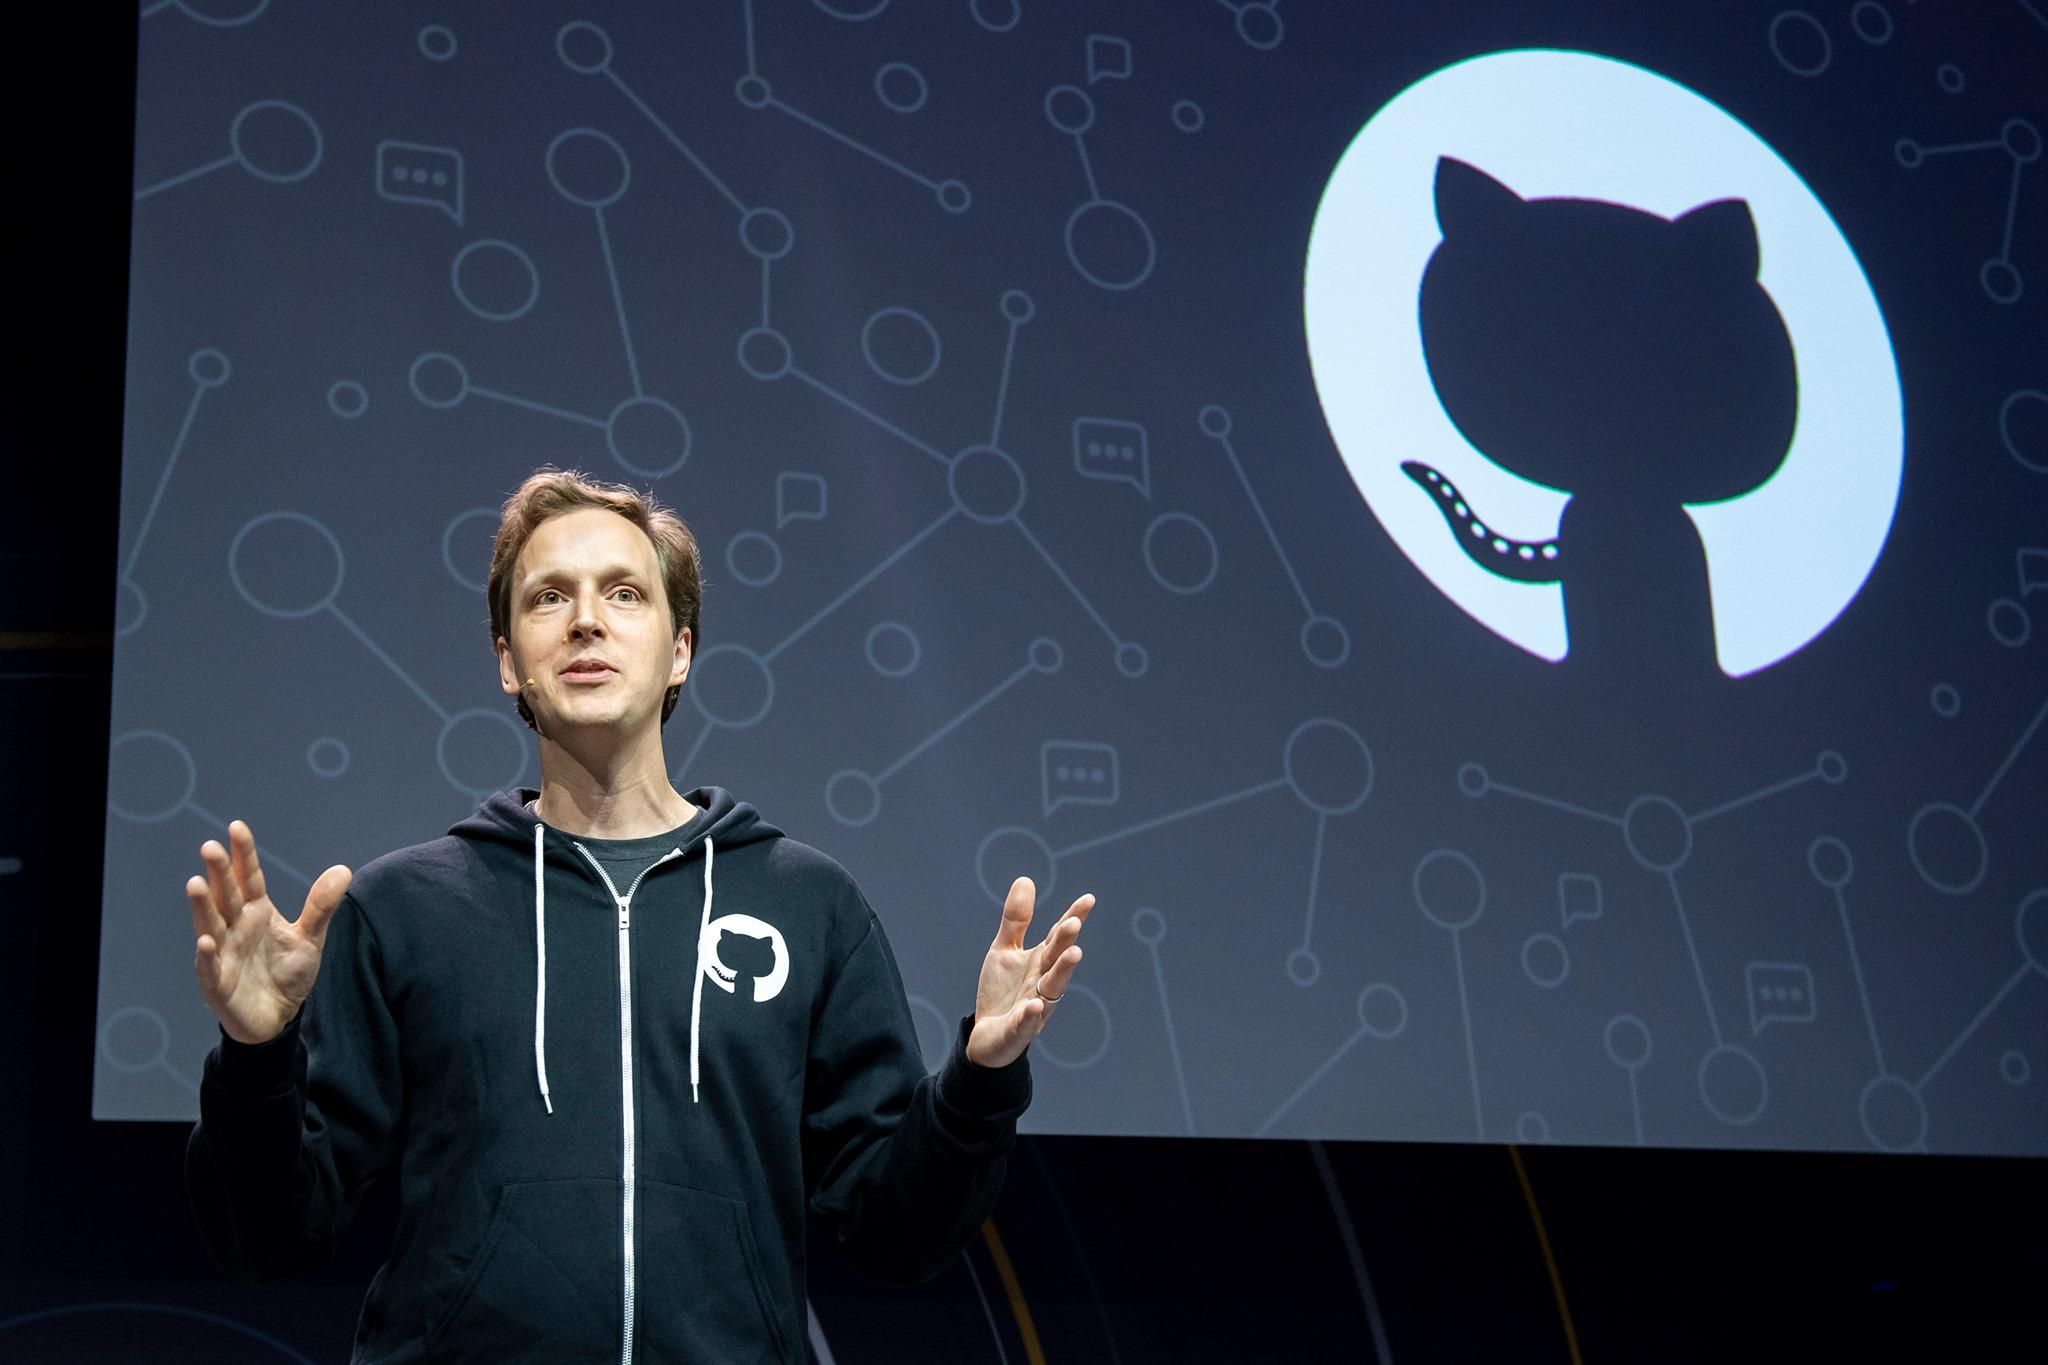 GitHub has seen steady growth since it was founded in 2008.